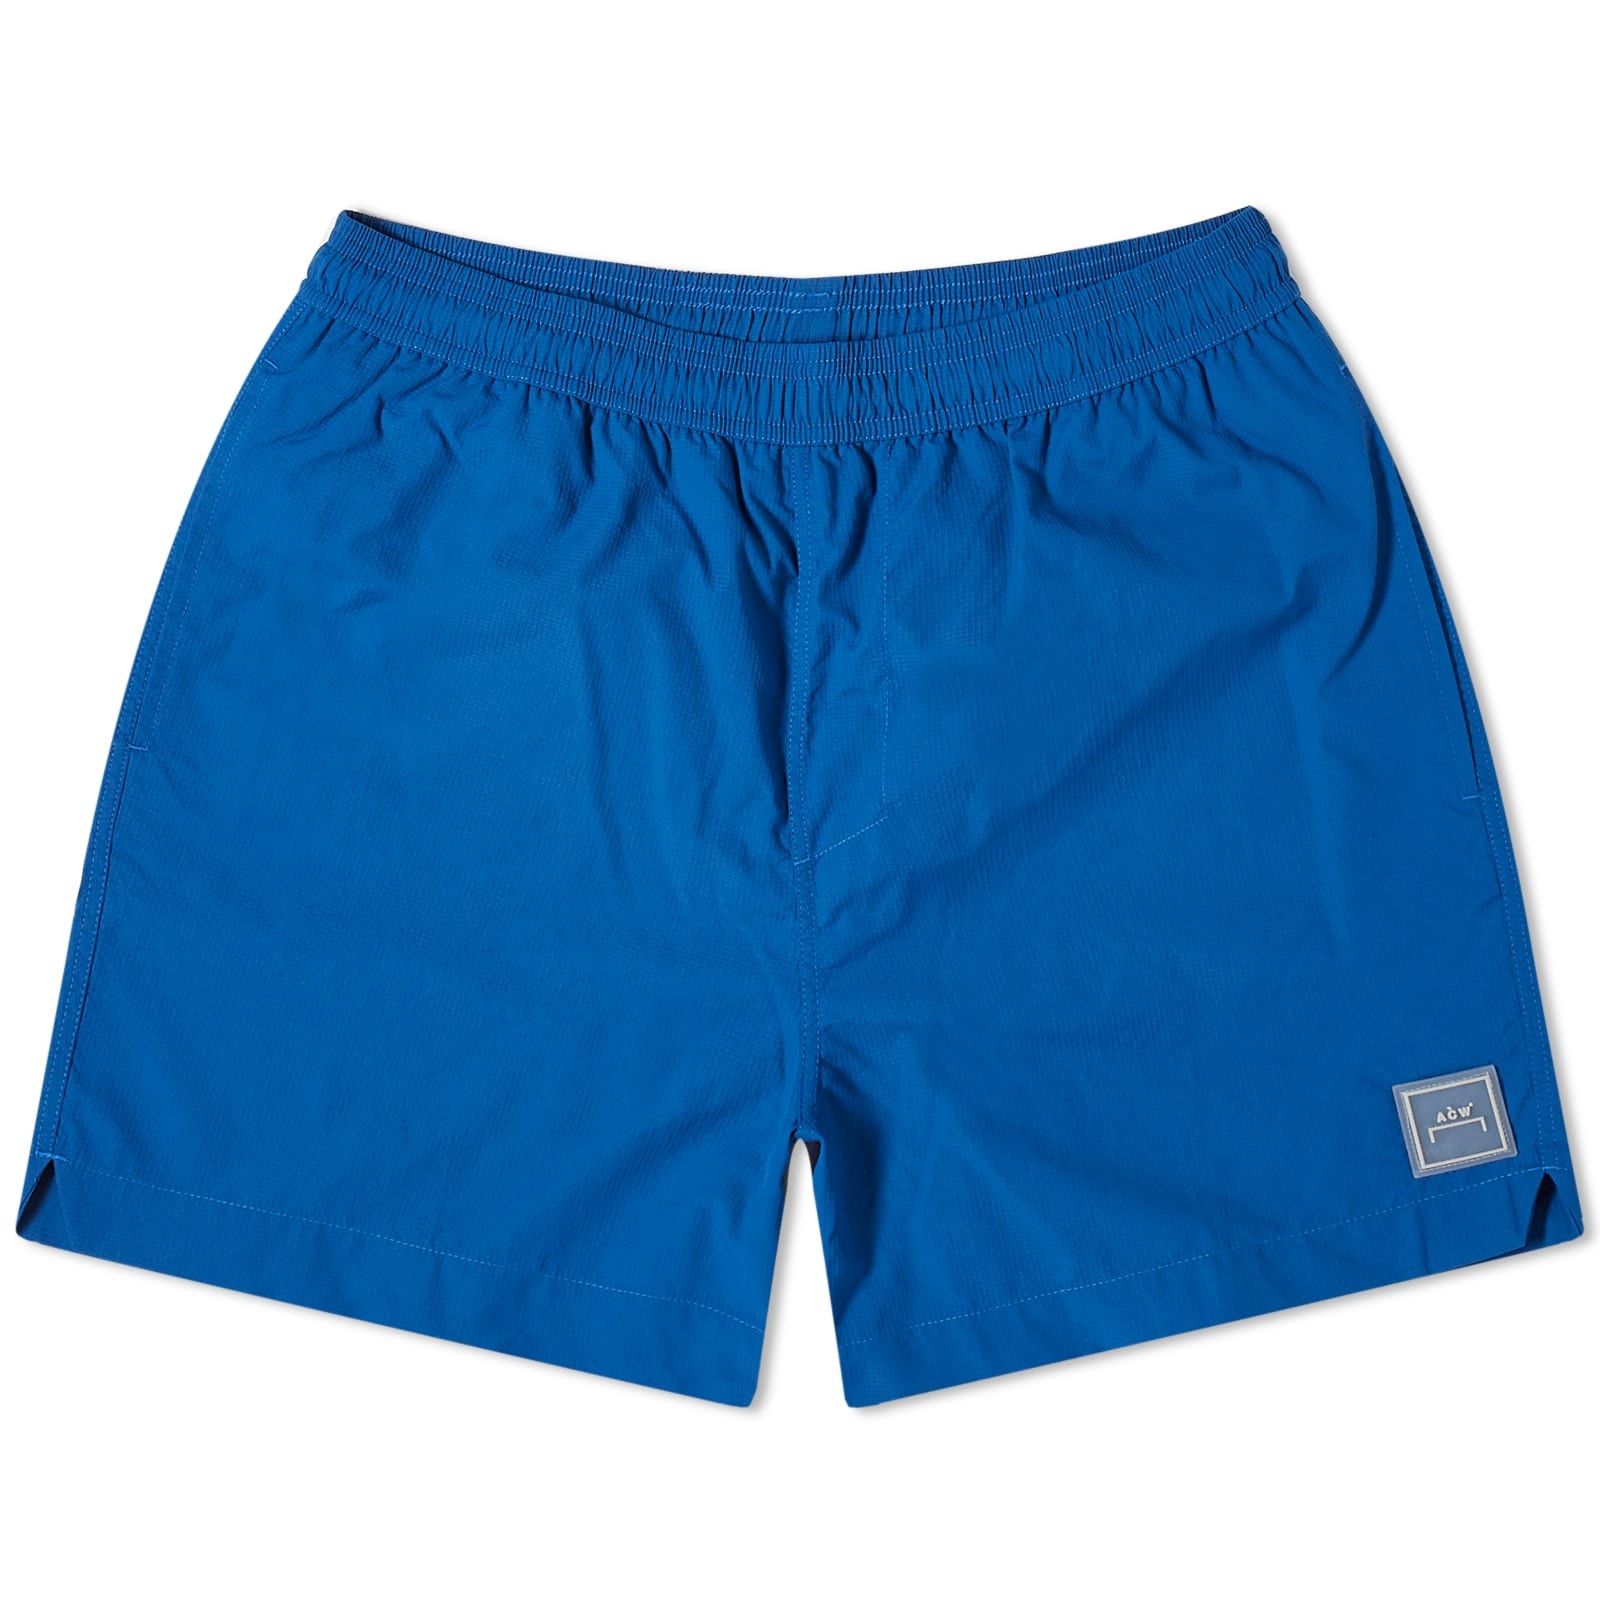 A-COLD-WALL* Essential Swimshort - 1